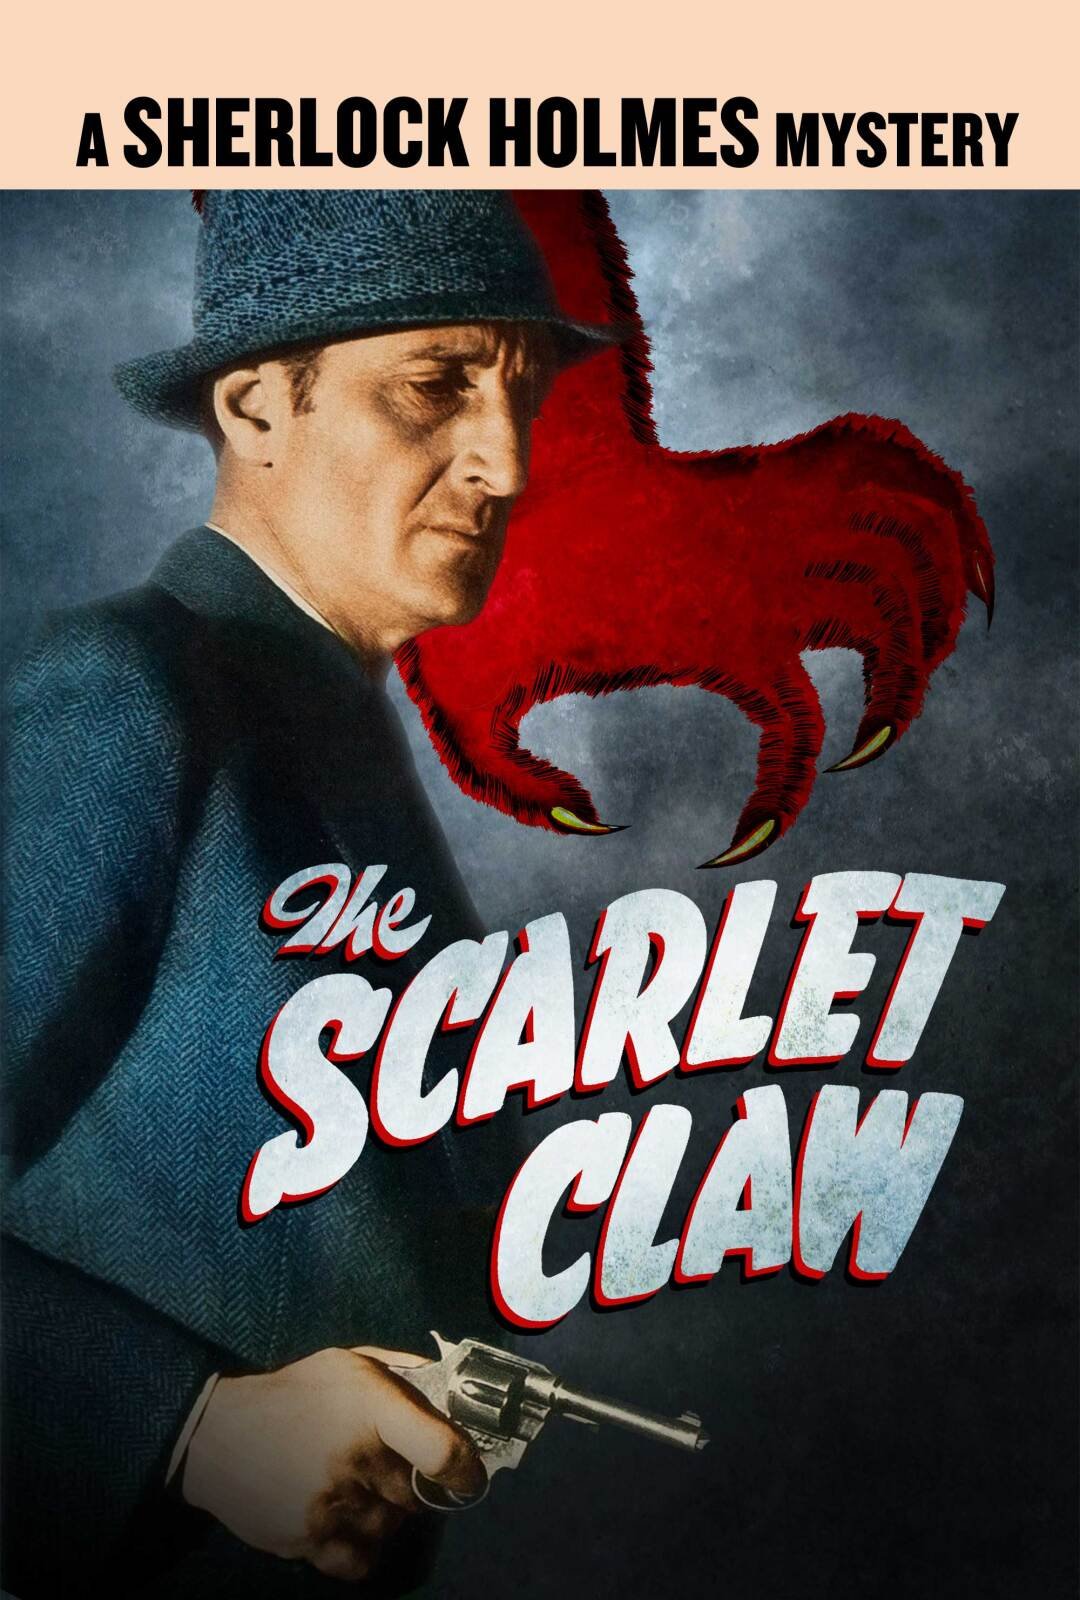 Sherlock Holmes And The Scarlet Claw